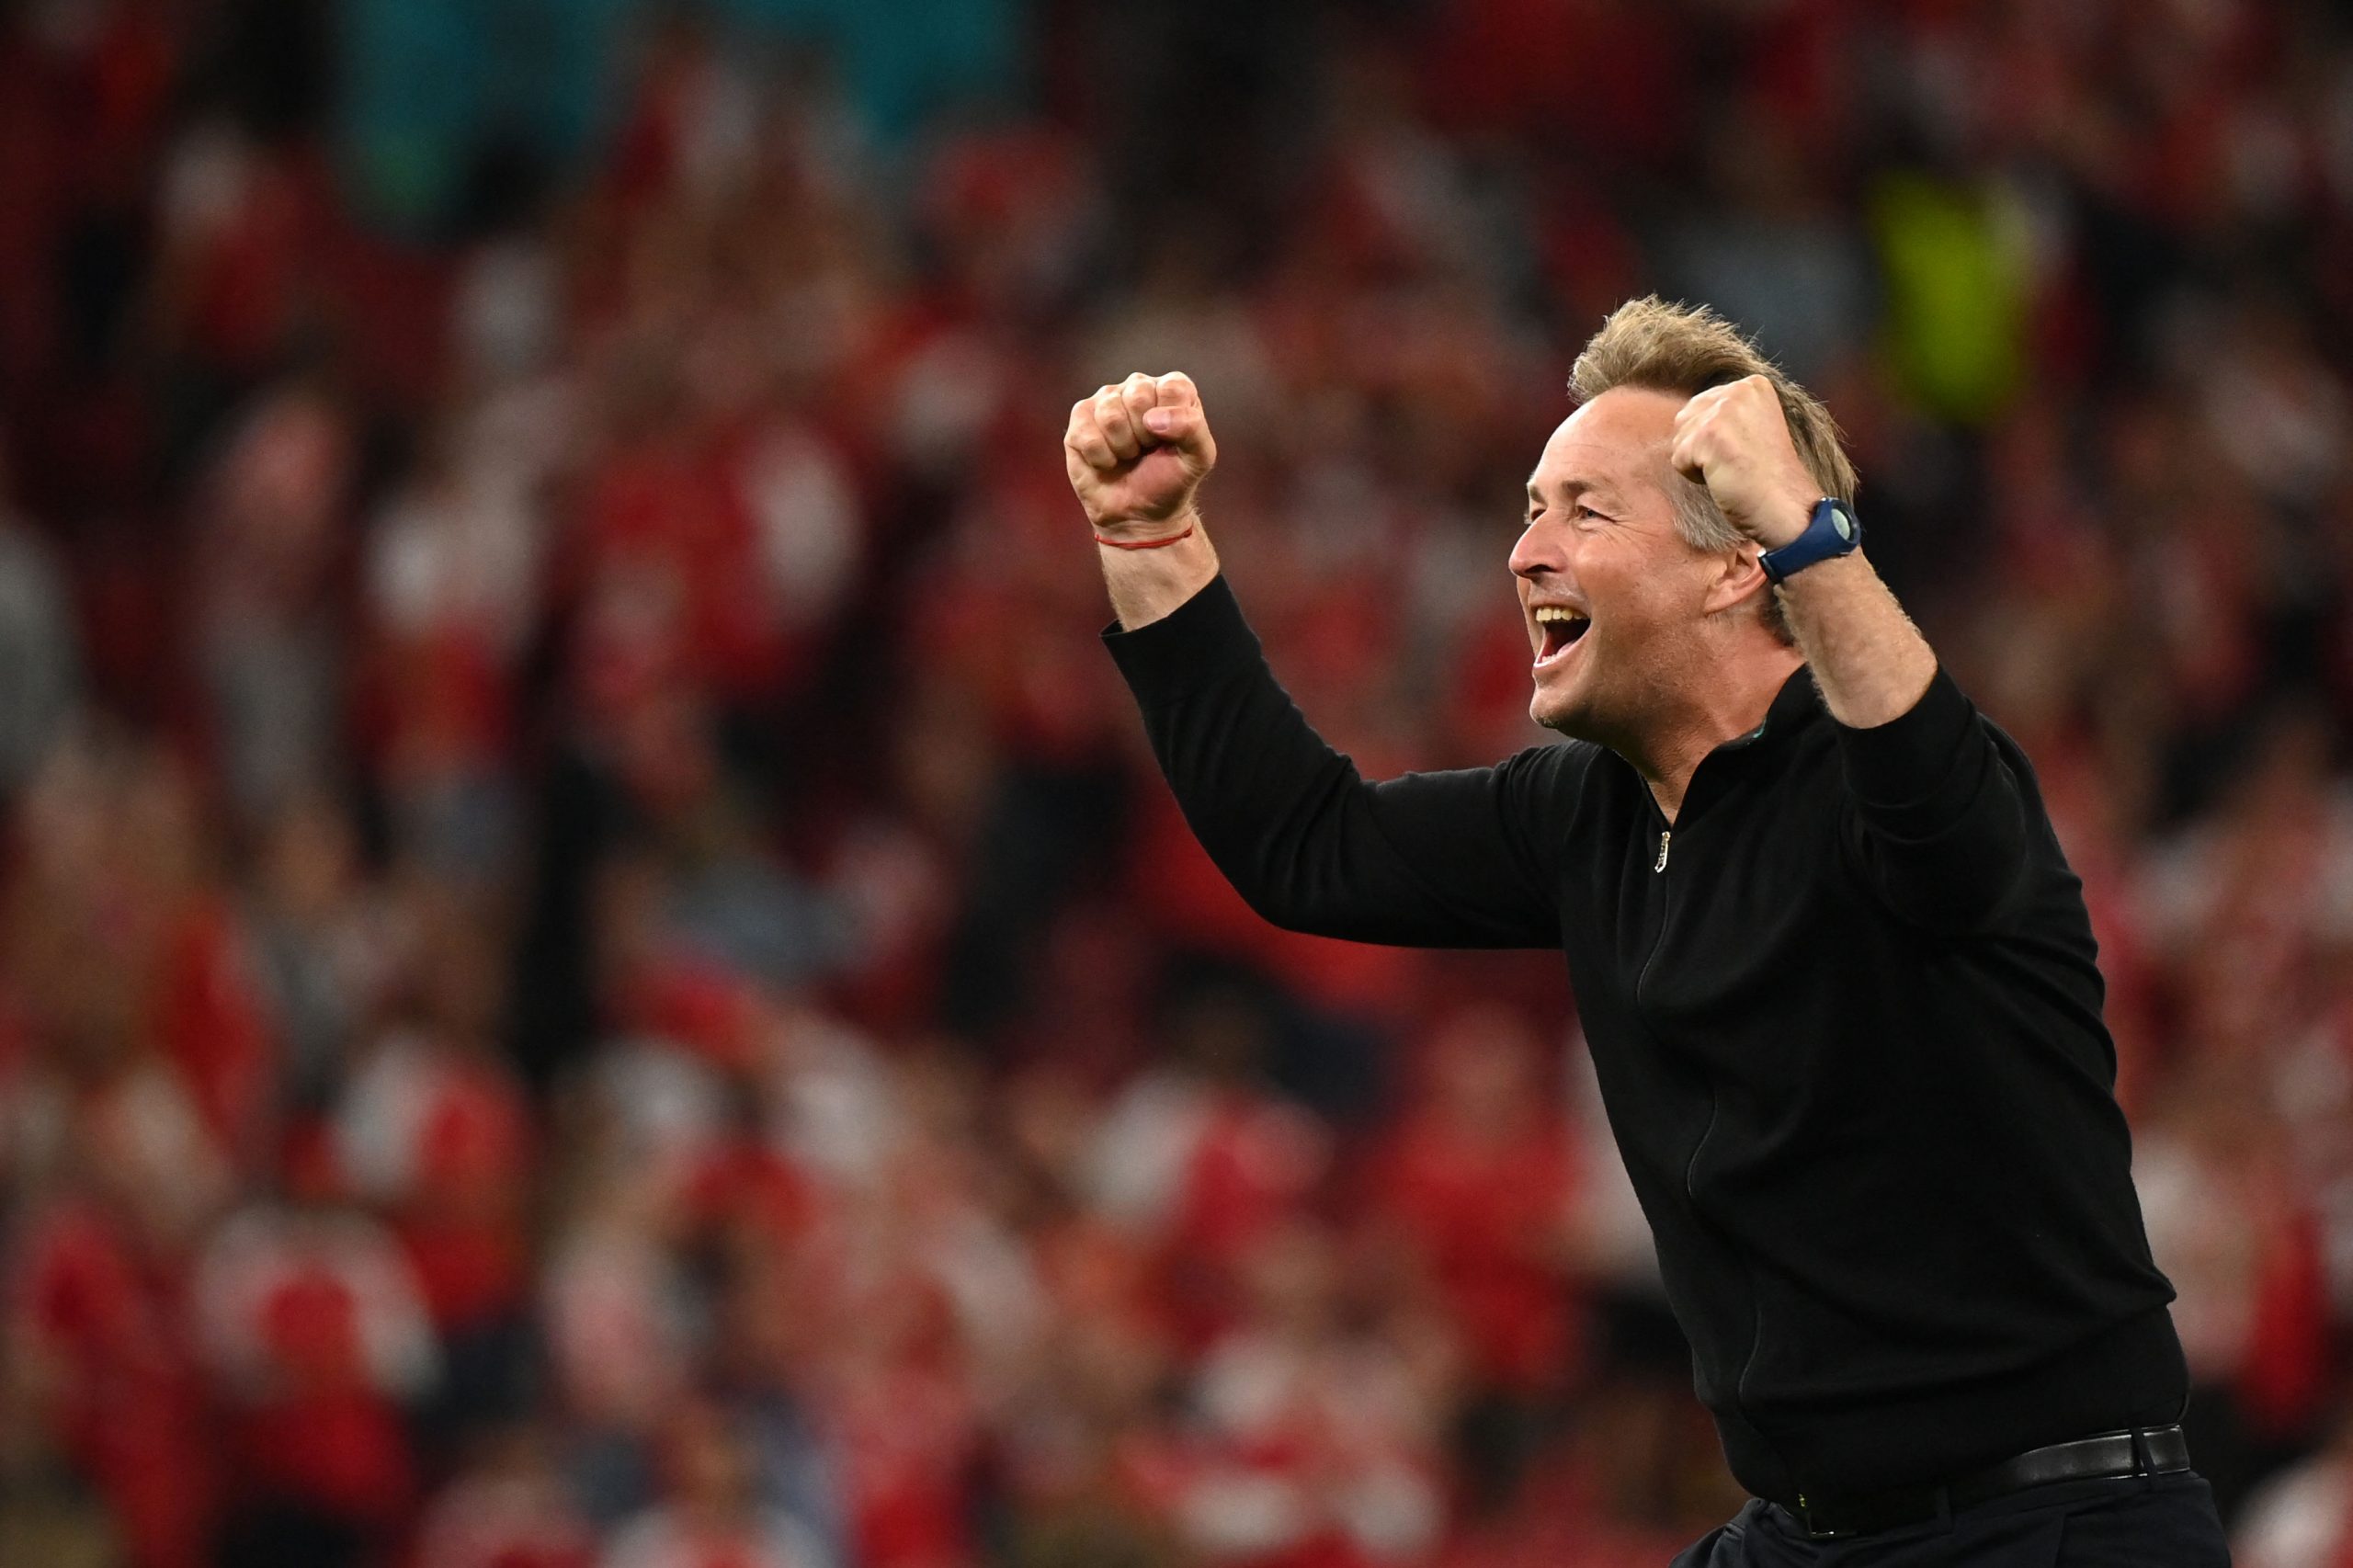 Euro 2020: Denmark’s win over Russia sends them, 5 others to the last 16